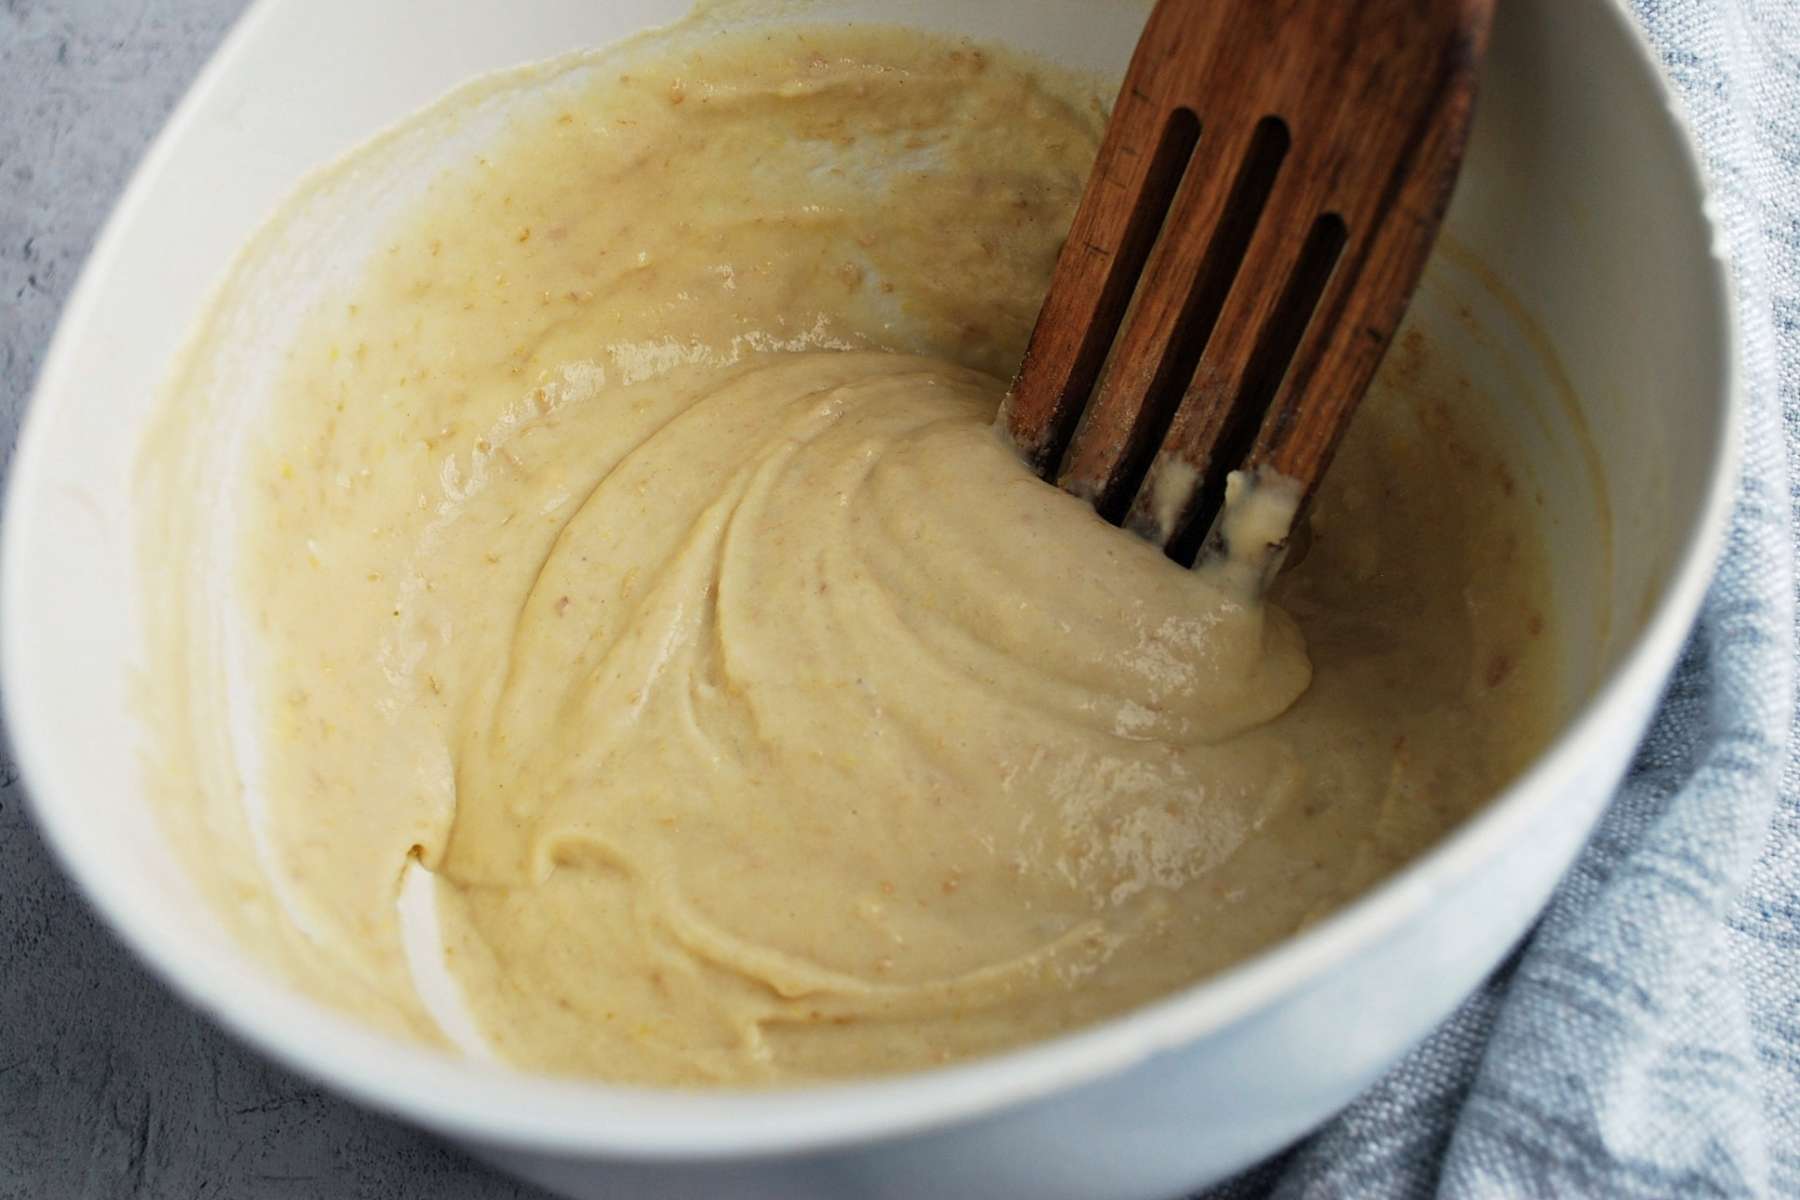 mixing pancake batter in a bowl with a wooden spoon